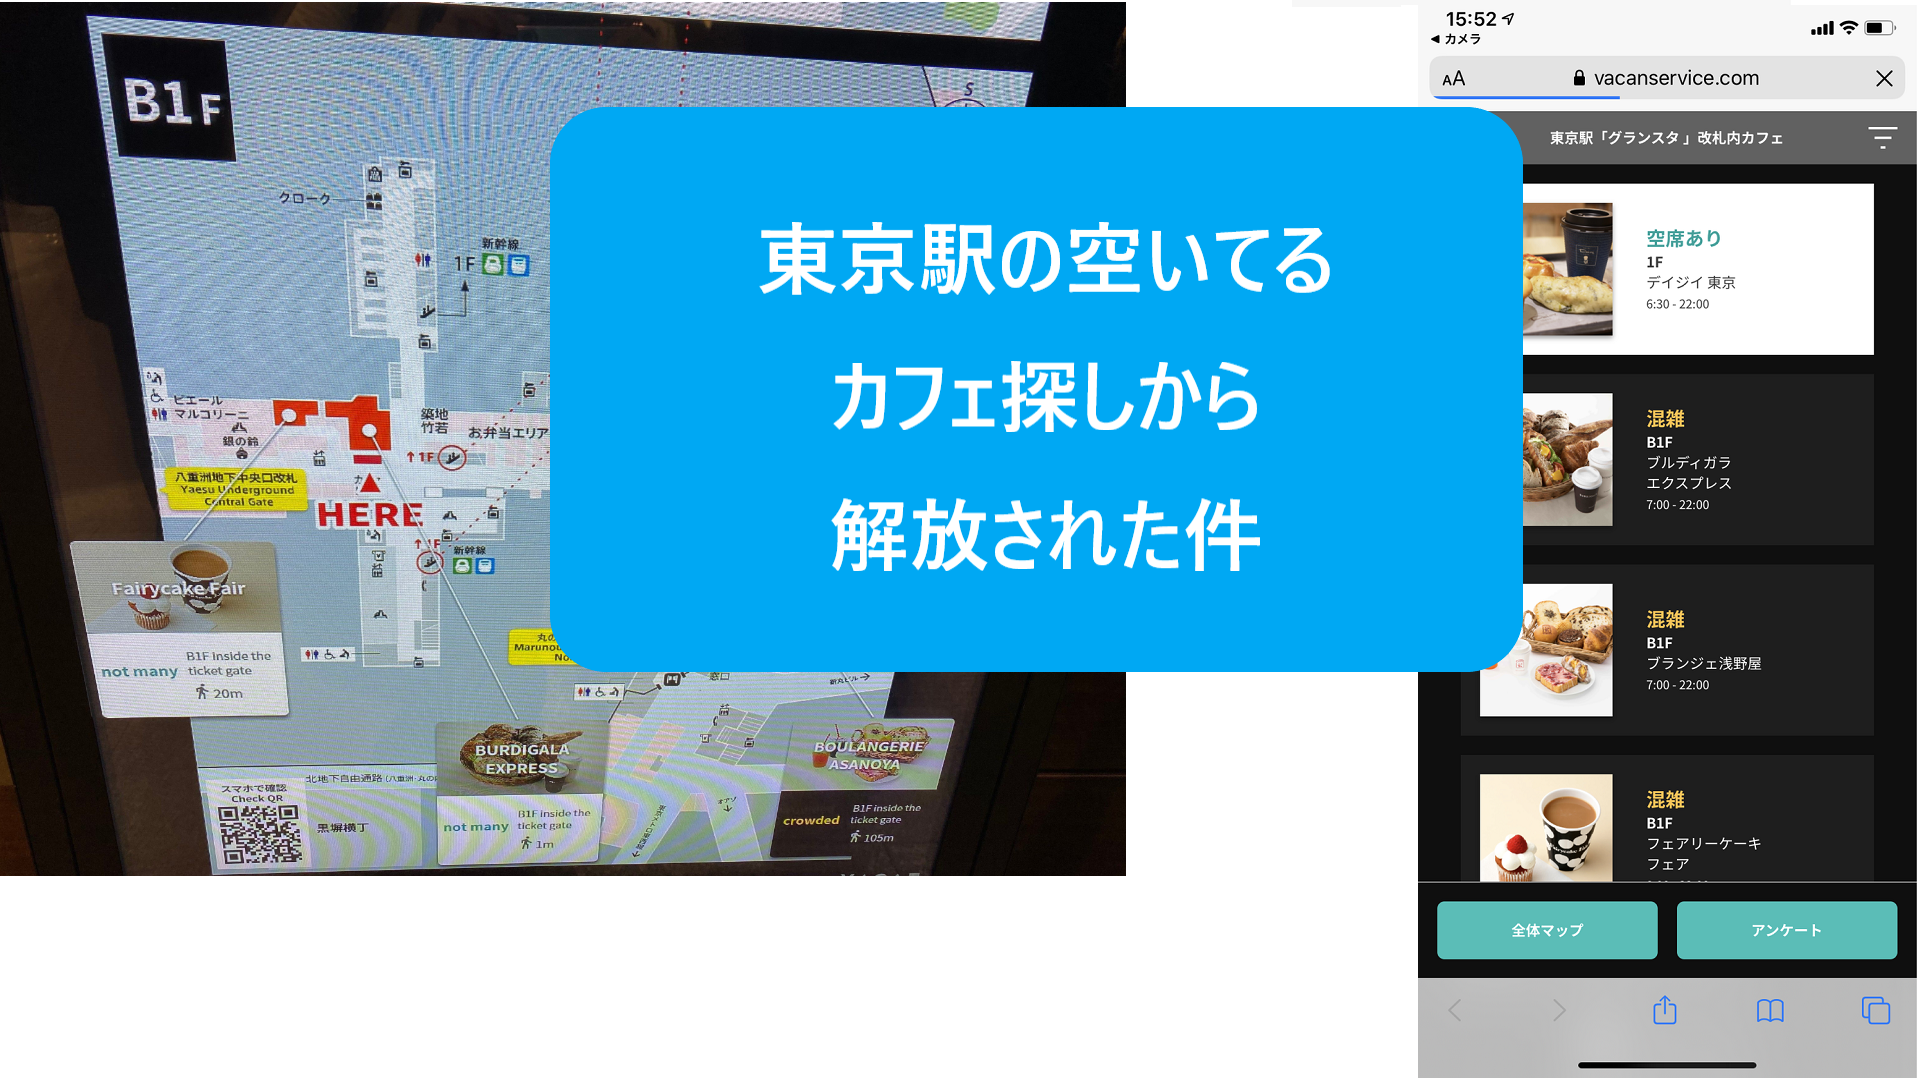 azblob://2022/11/11/eyecatch/2019-12-25-know-the-vacant-seat-information-of-the-cafe-in-tokyo-station-000.png